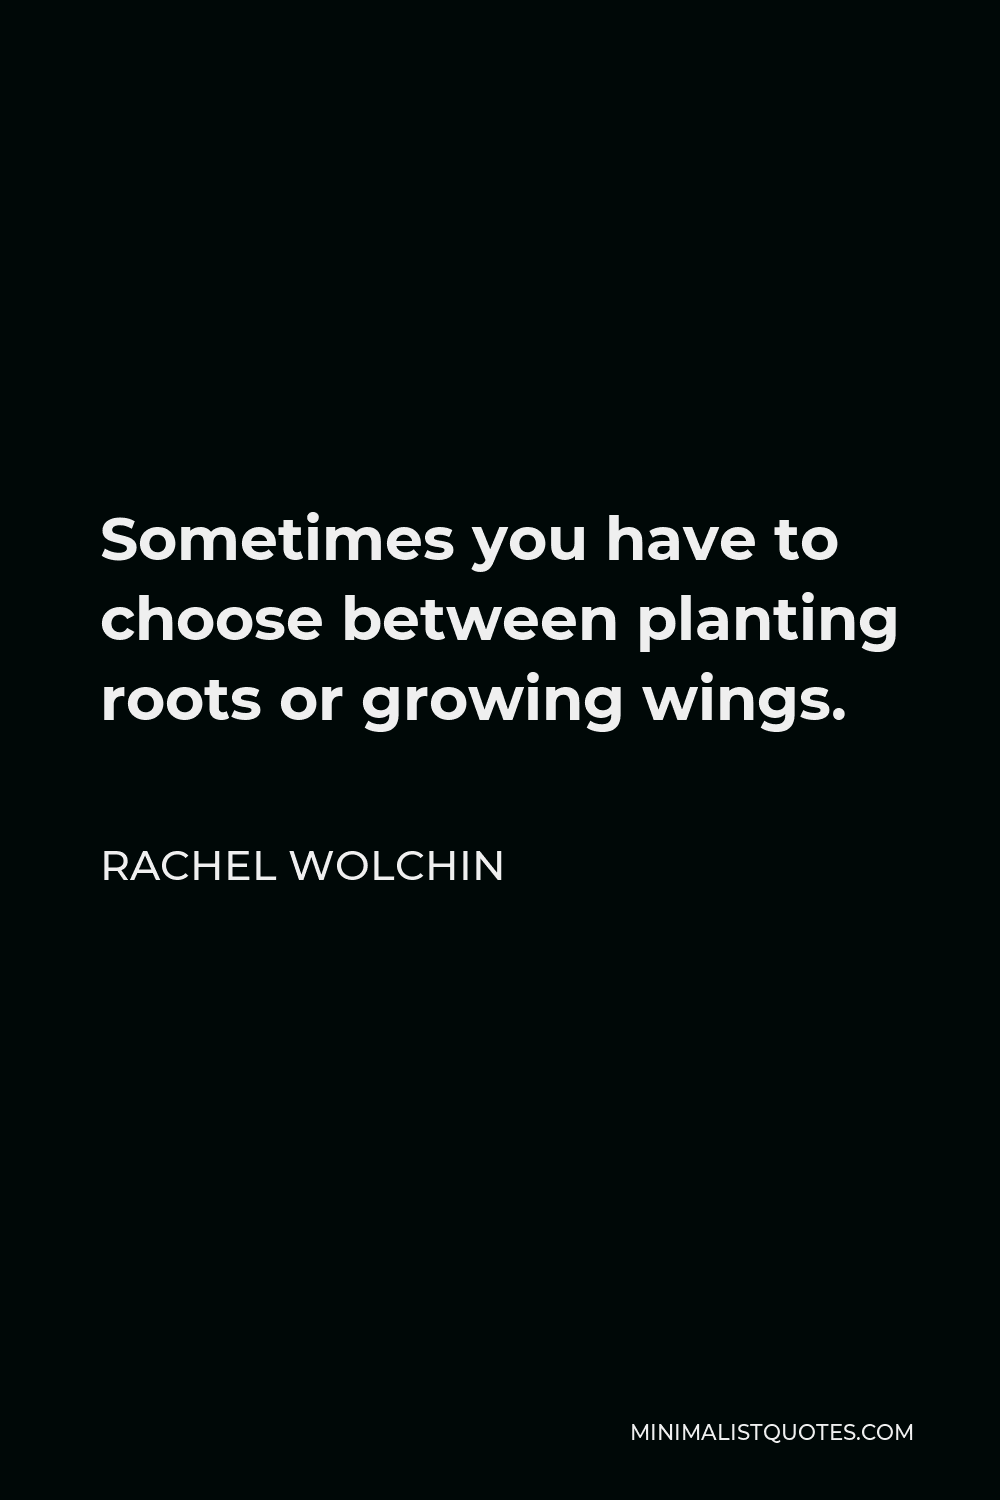 Rachel Wolchin Quote - Sometimes you have to choose between planting roots or growing wings.